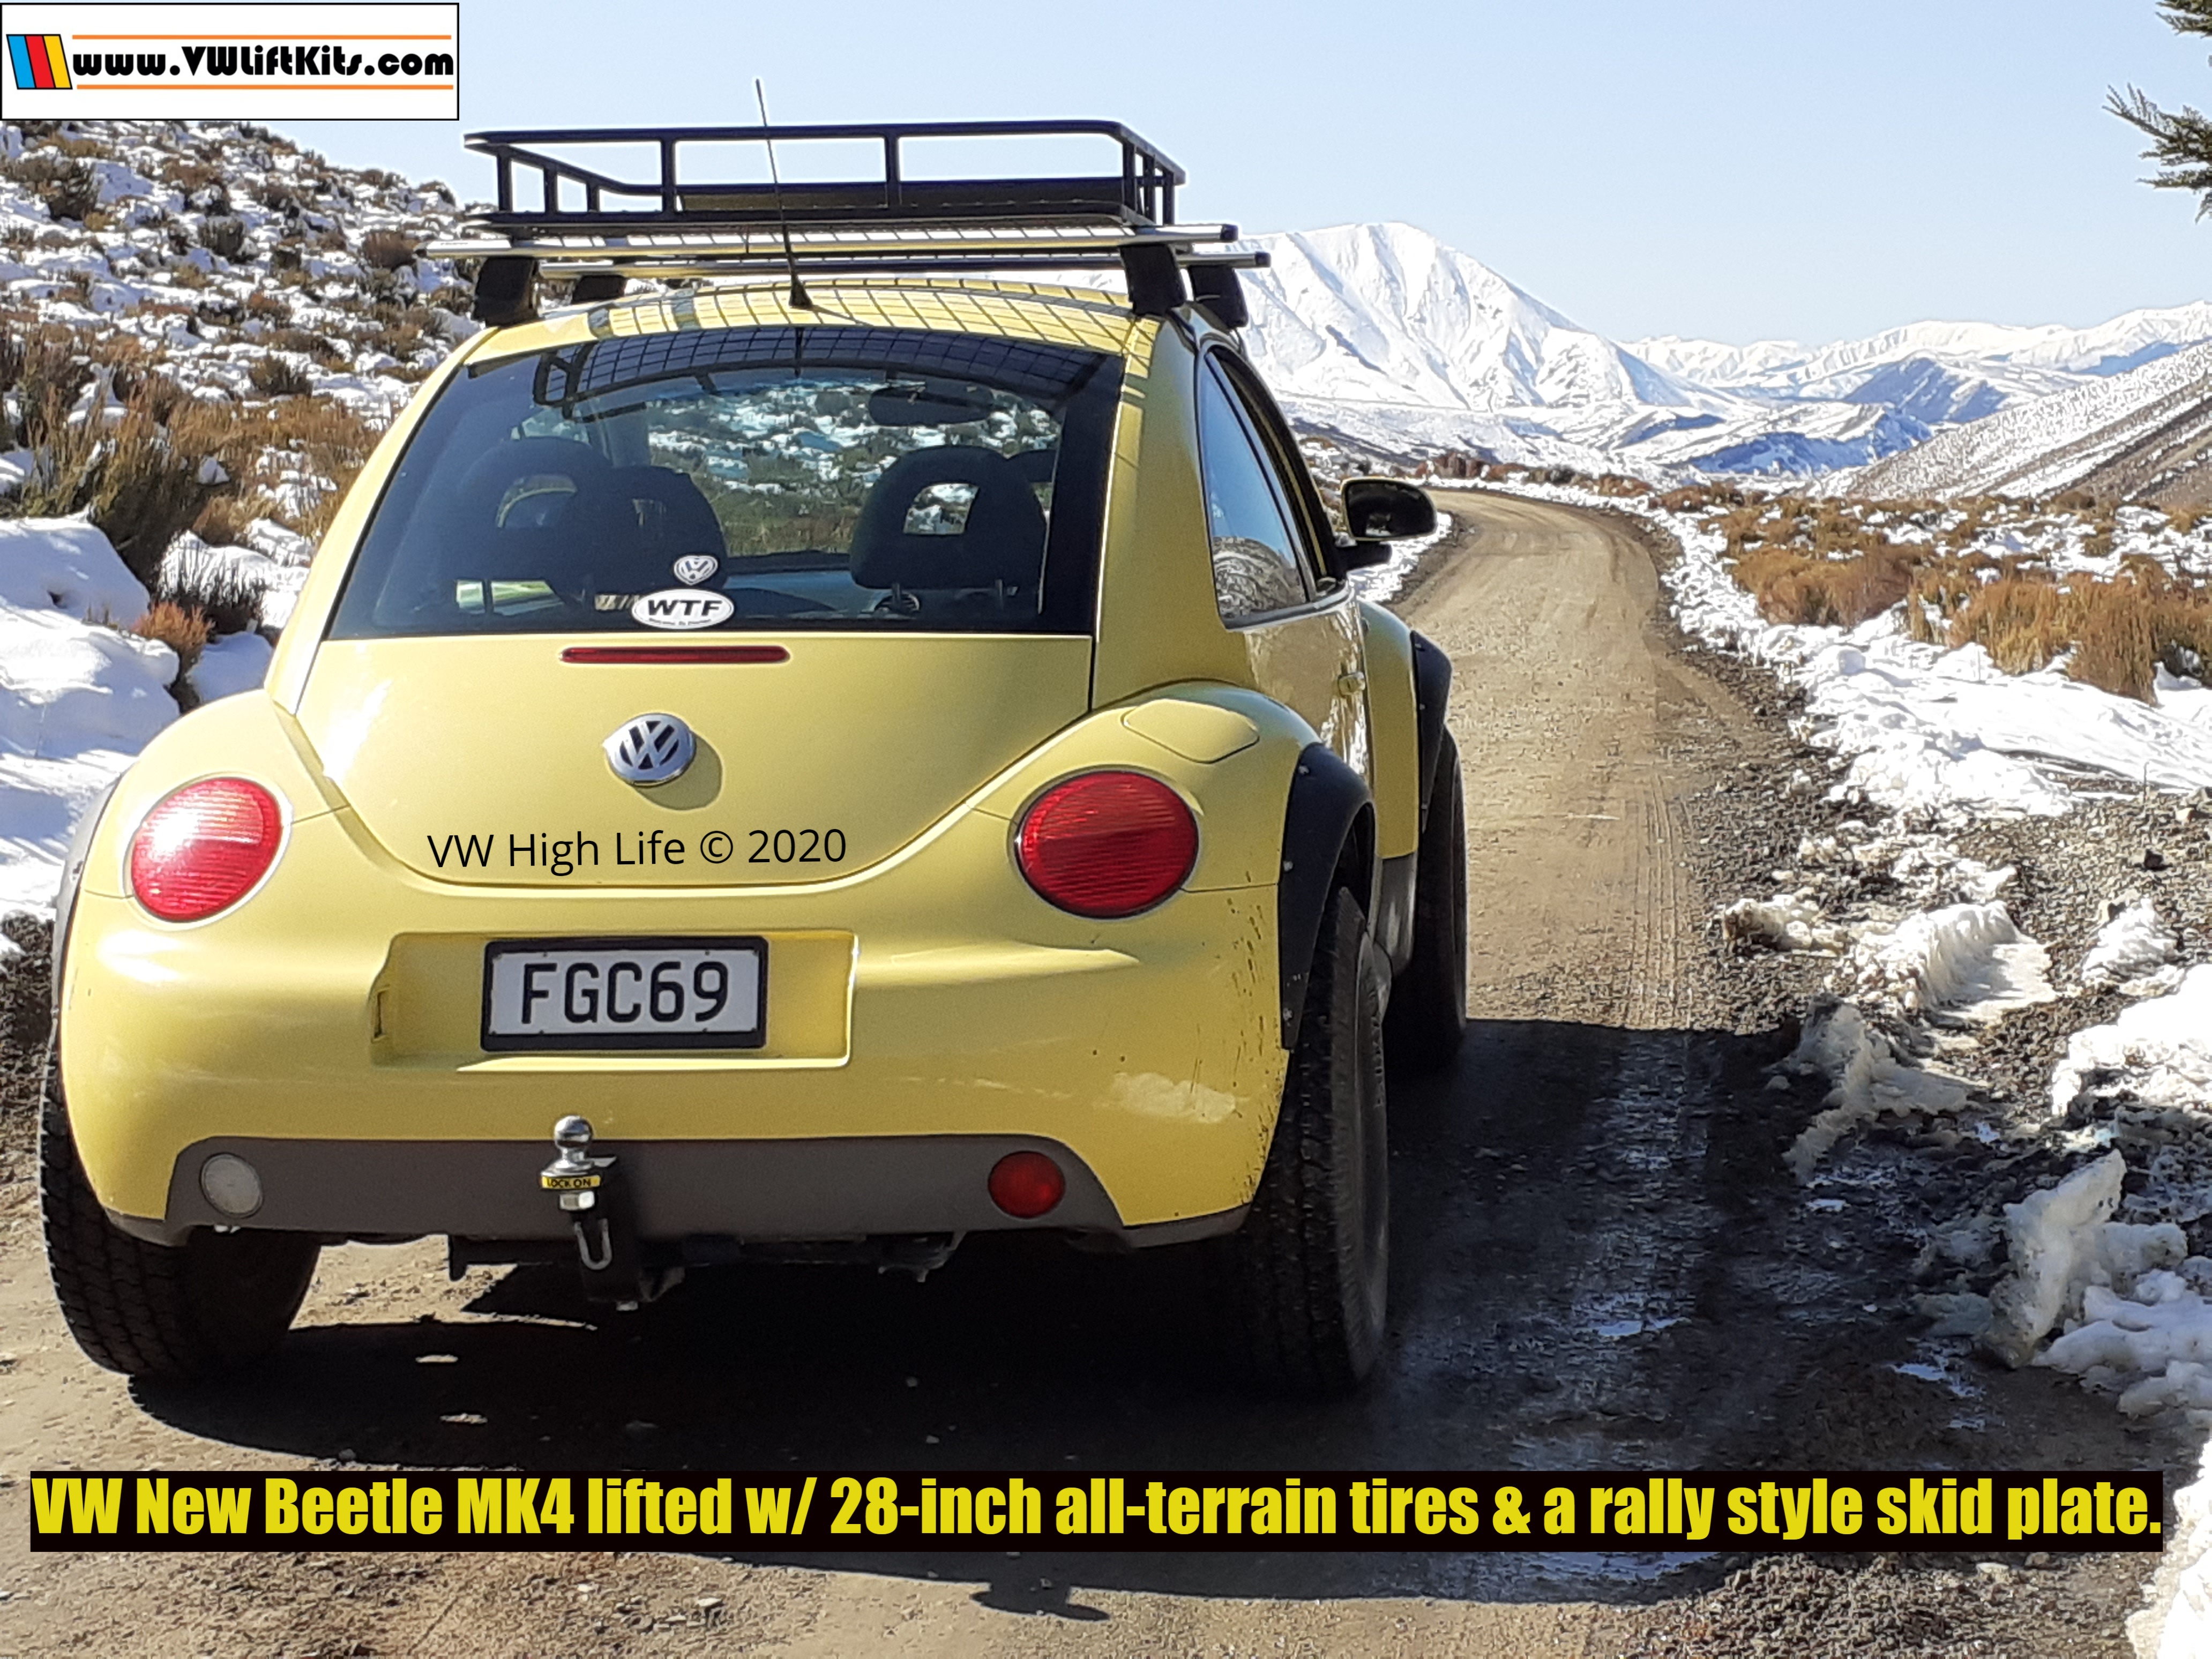 Richard's infamous COVID Beetle wheeling in KiwiLand with the VW High Life Winter Rough Road Package.